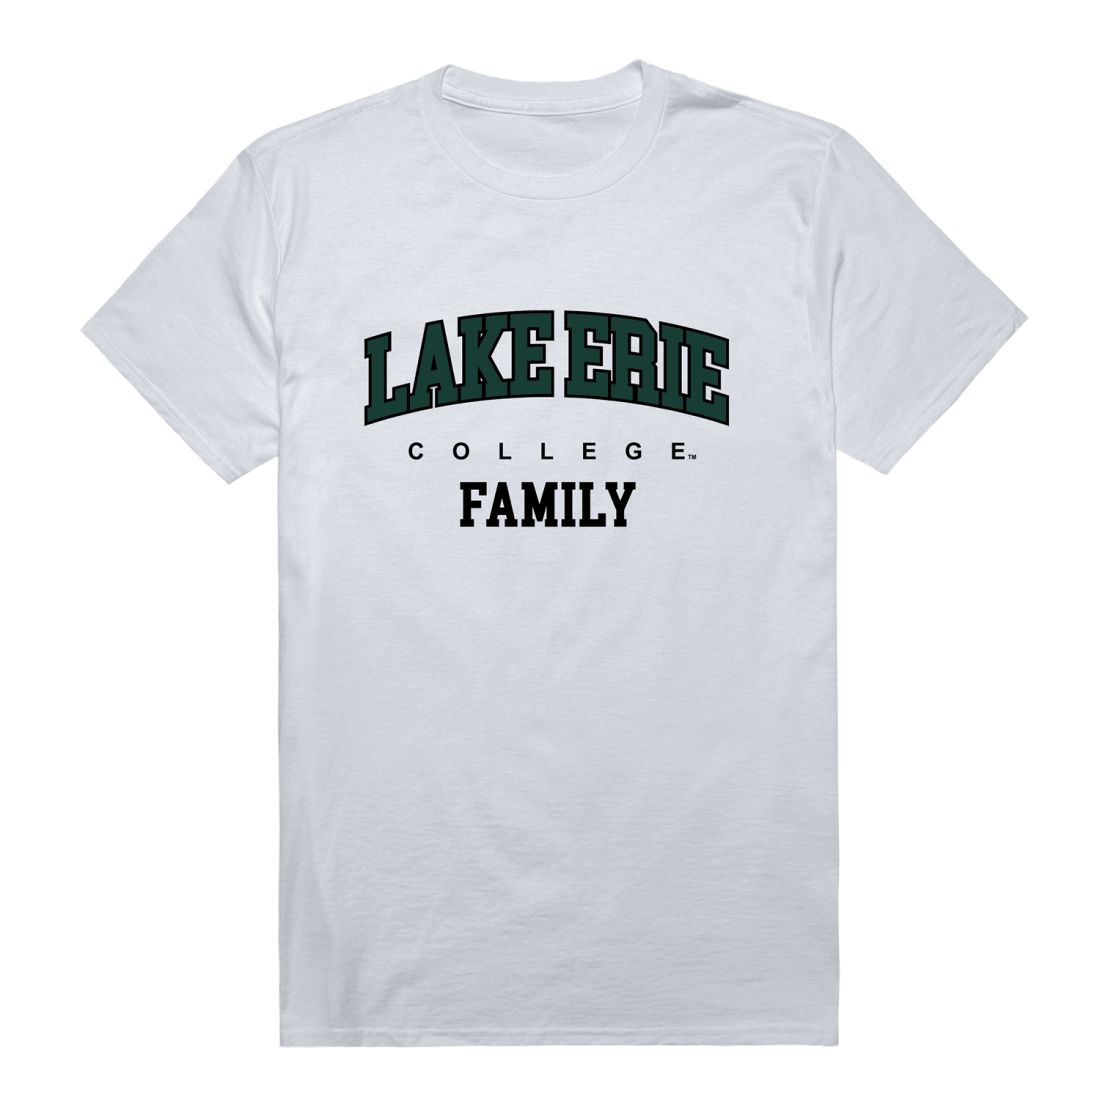 Lake Erie College Storm Family T-Shirt